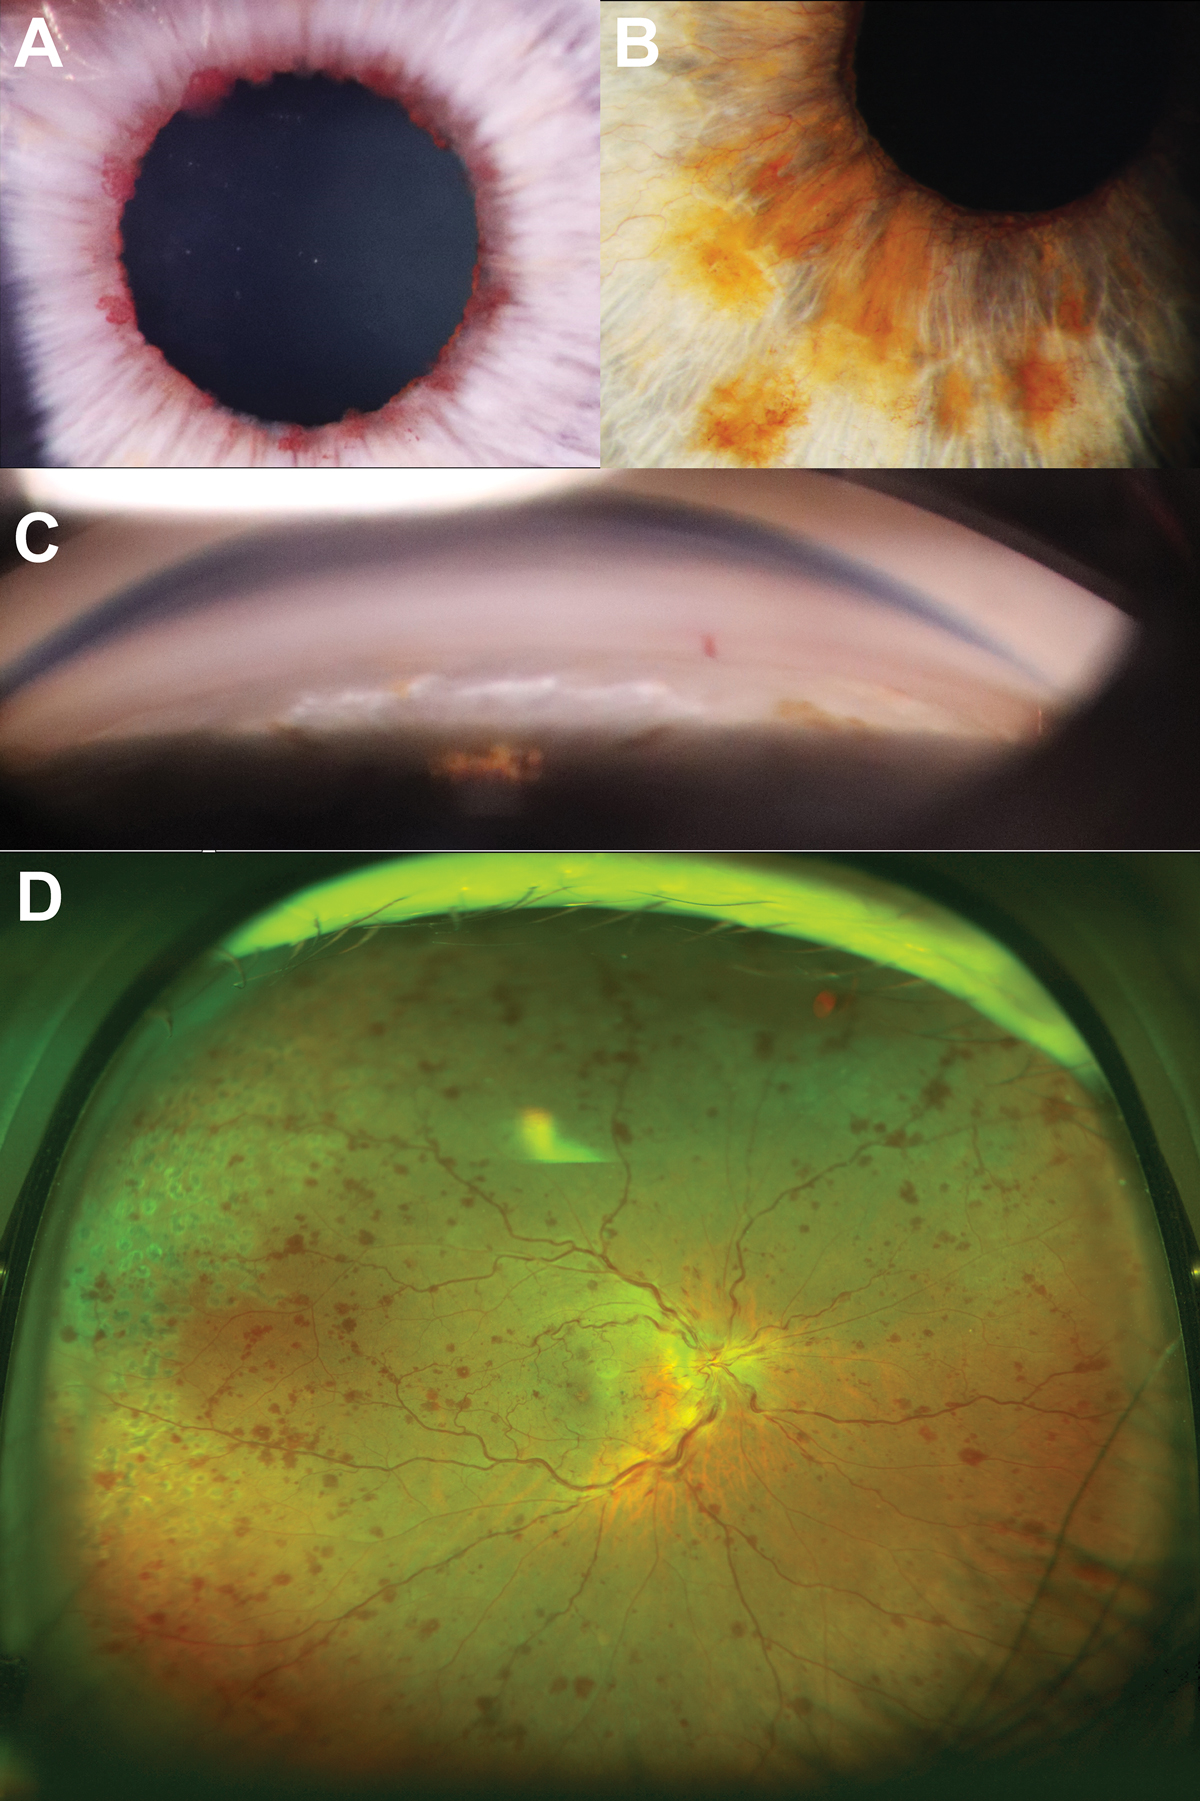 Fig. 5. (A) Tuft-like neovascularization along the pupillary margin. (B) Proliferation of the iris neovascularization from the across the anterior iris surface. (C) Neovascularization seen within the angle on gonioscopy. (D) Ultra-widefield imaging of the active central retinal vein occlusion in the right eye from the patient shown in B and C.